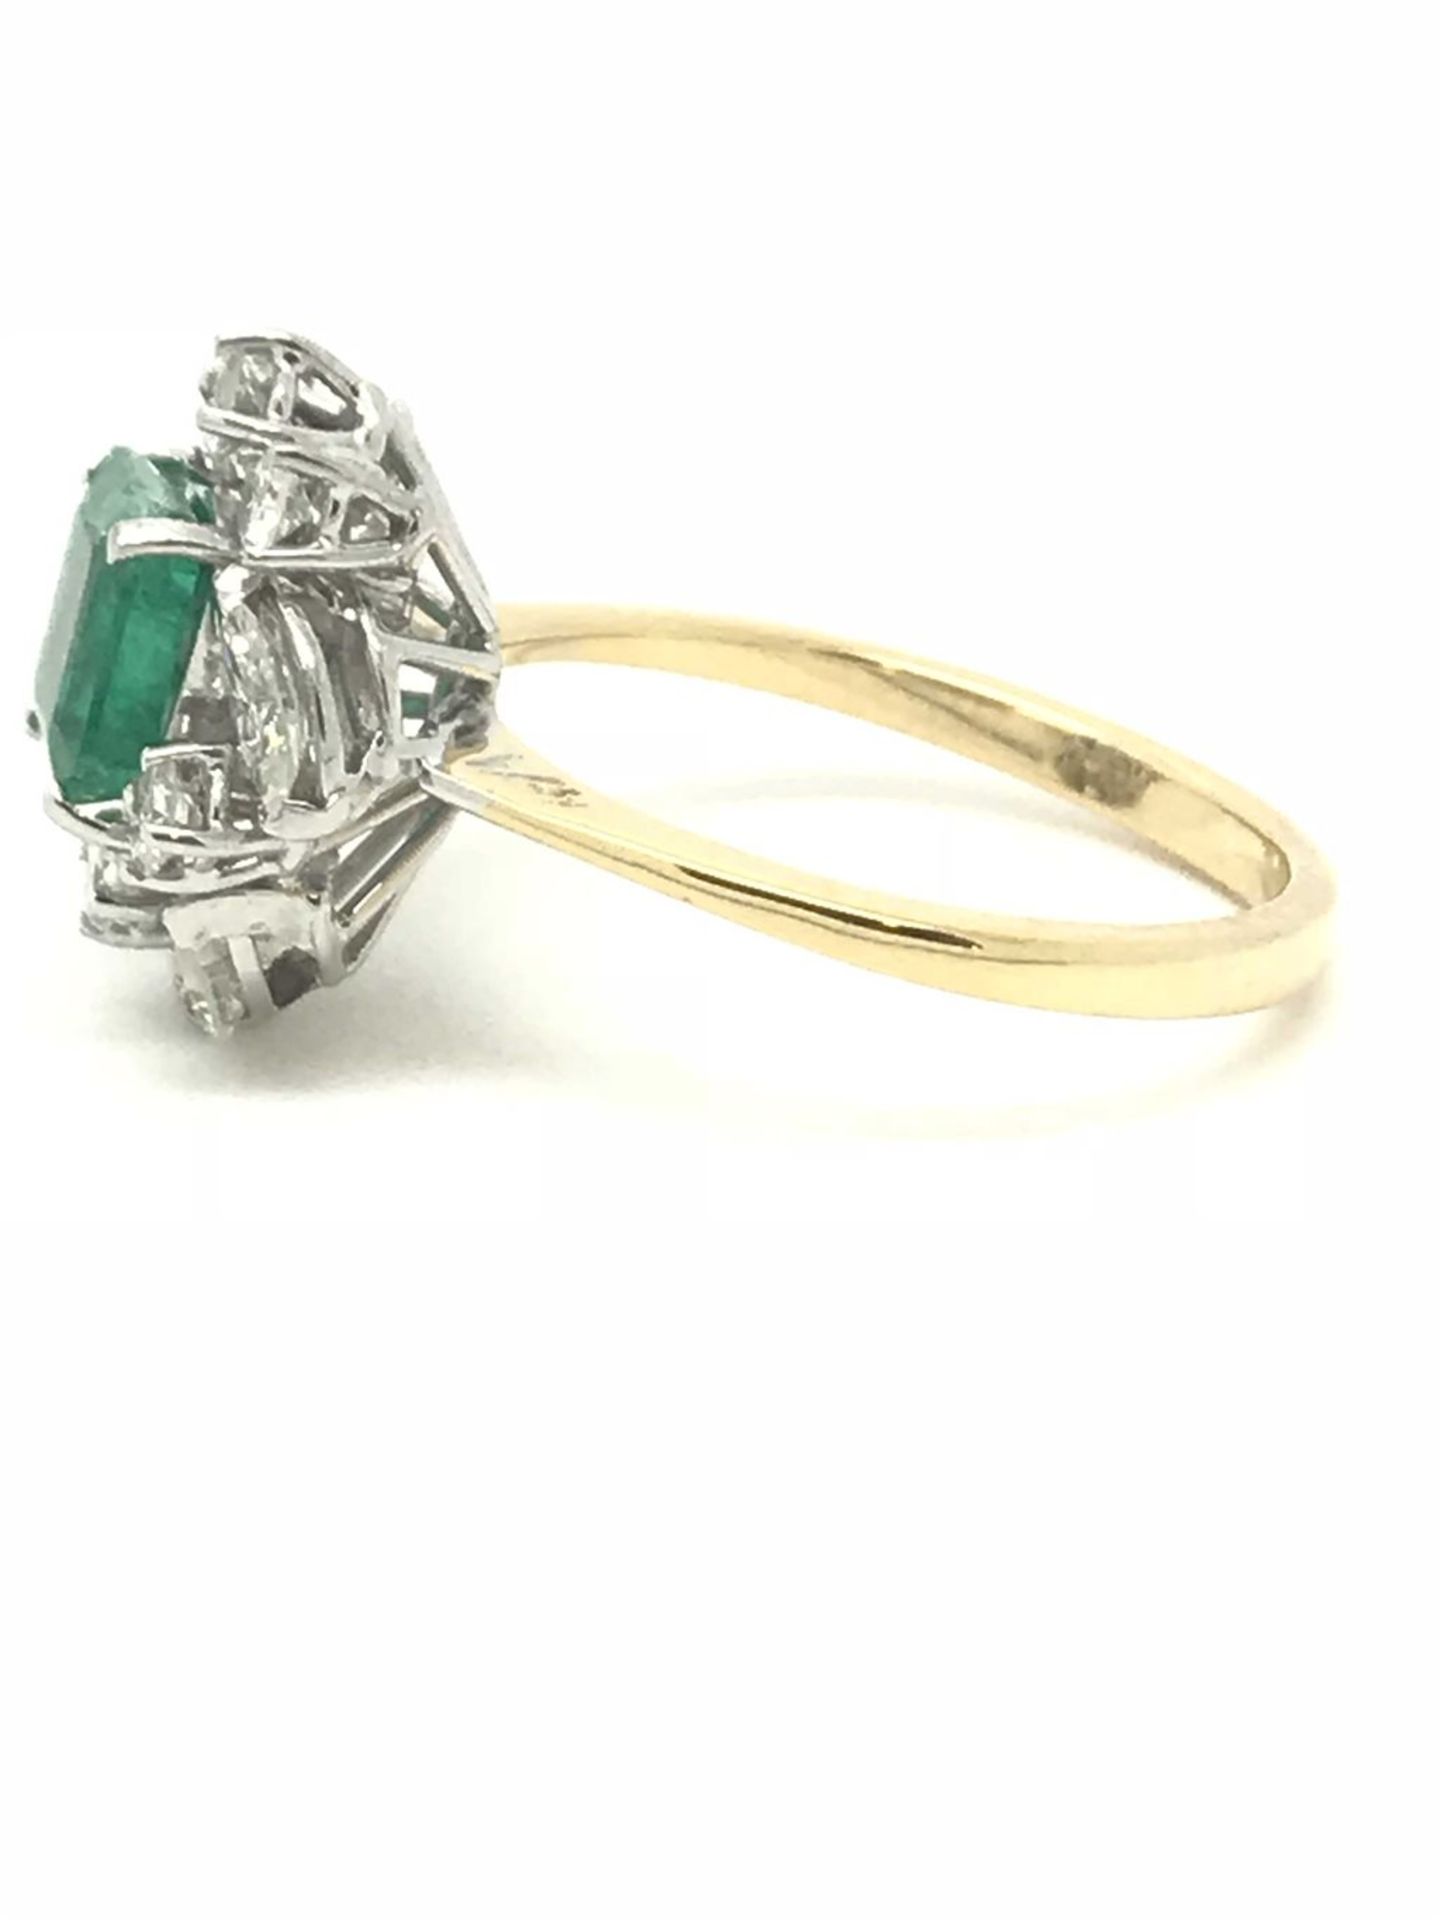 Emerald & Diamond (1.05ct) Cluster Ring, 18ct Yellow Gold - Image 3 of 5